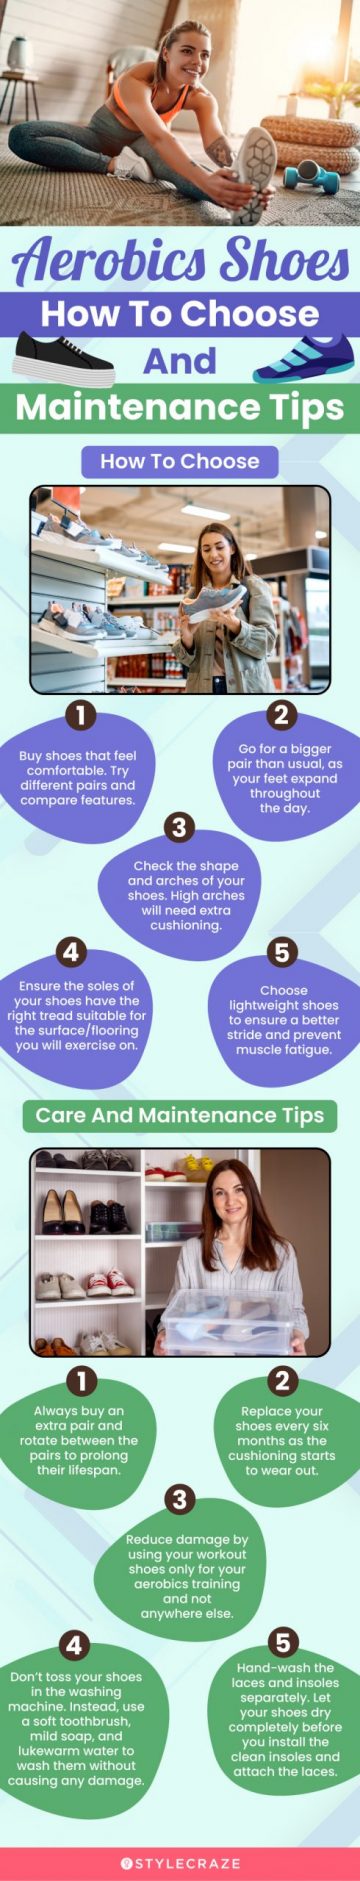 aerobics shoes how to choose and maintenance tips (infographic)